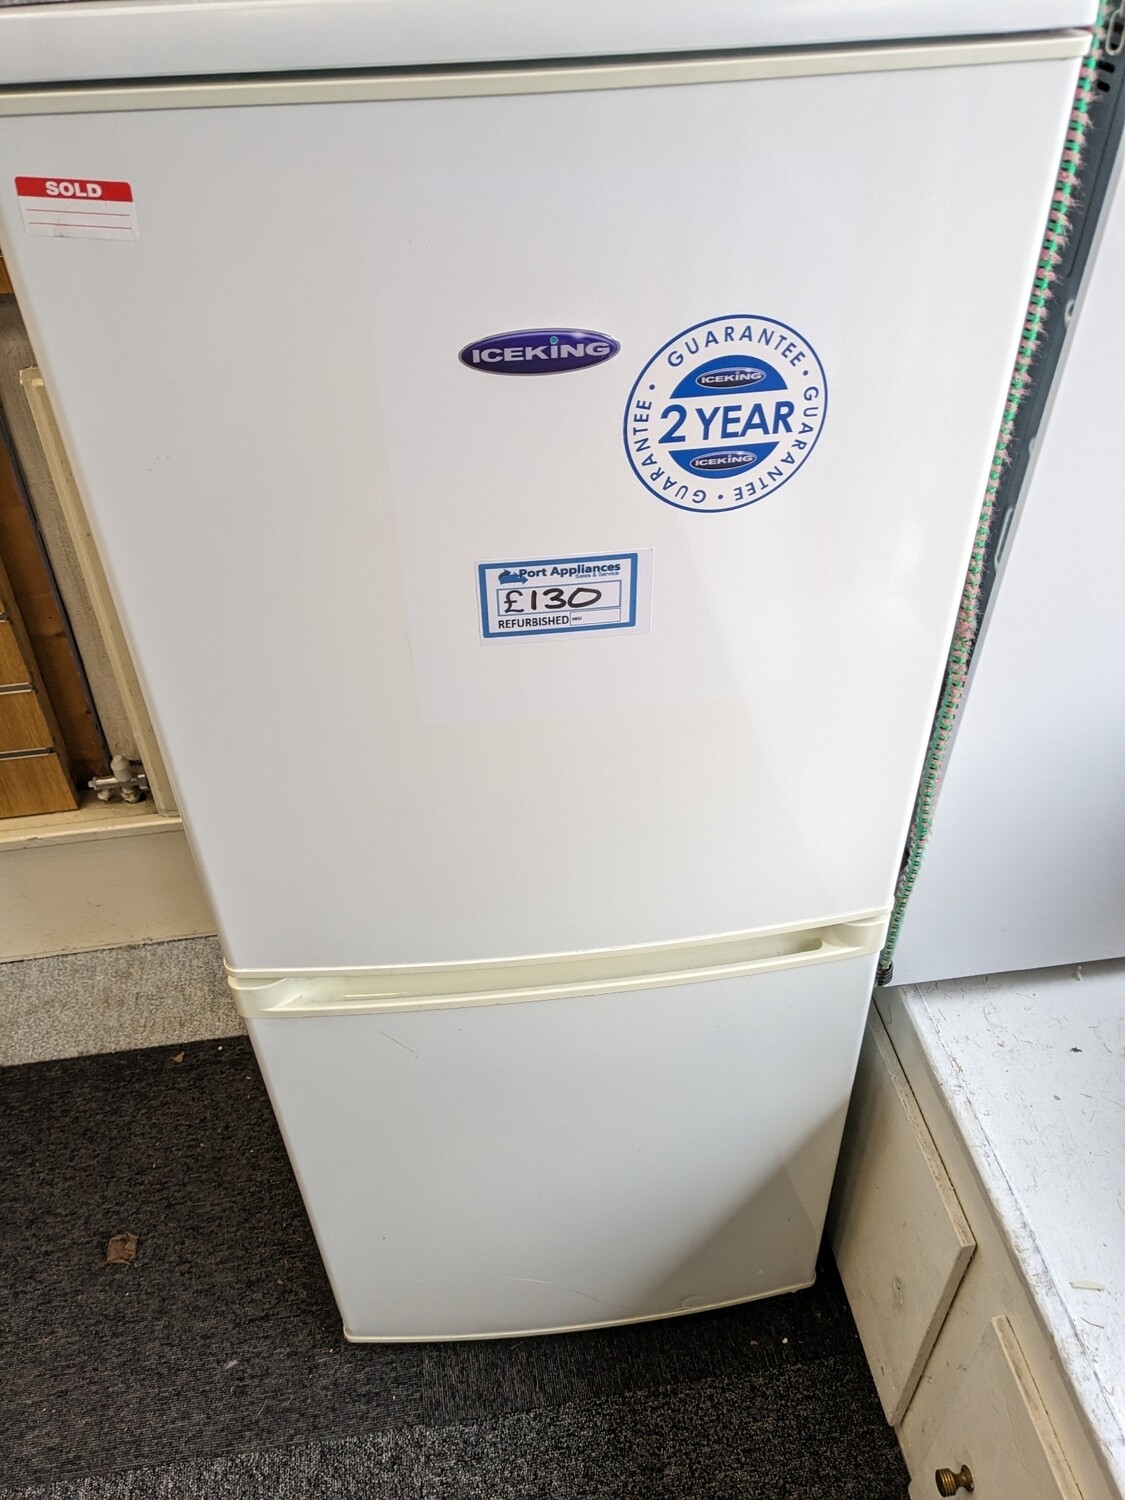 Iceking White Fridge Freezer This item is located in our Whitby road shop